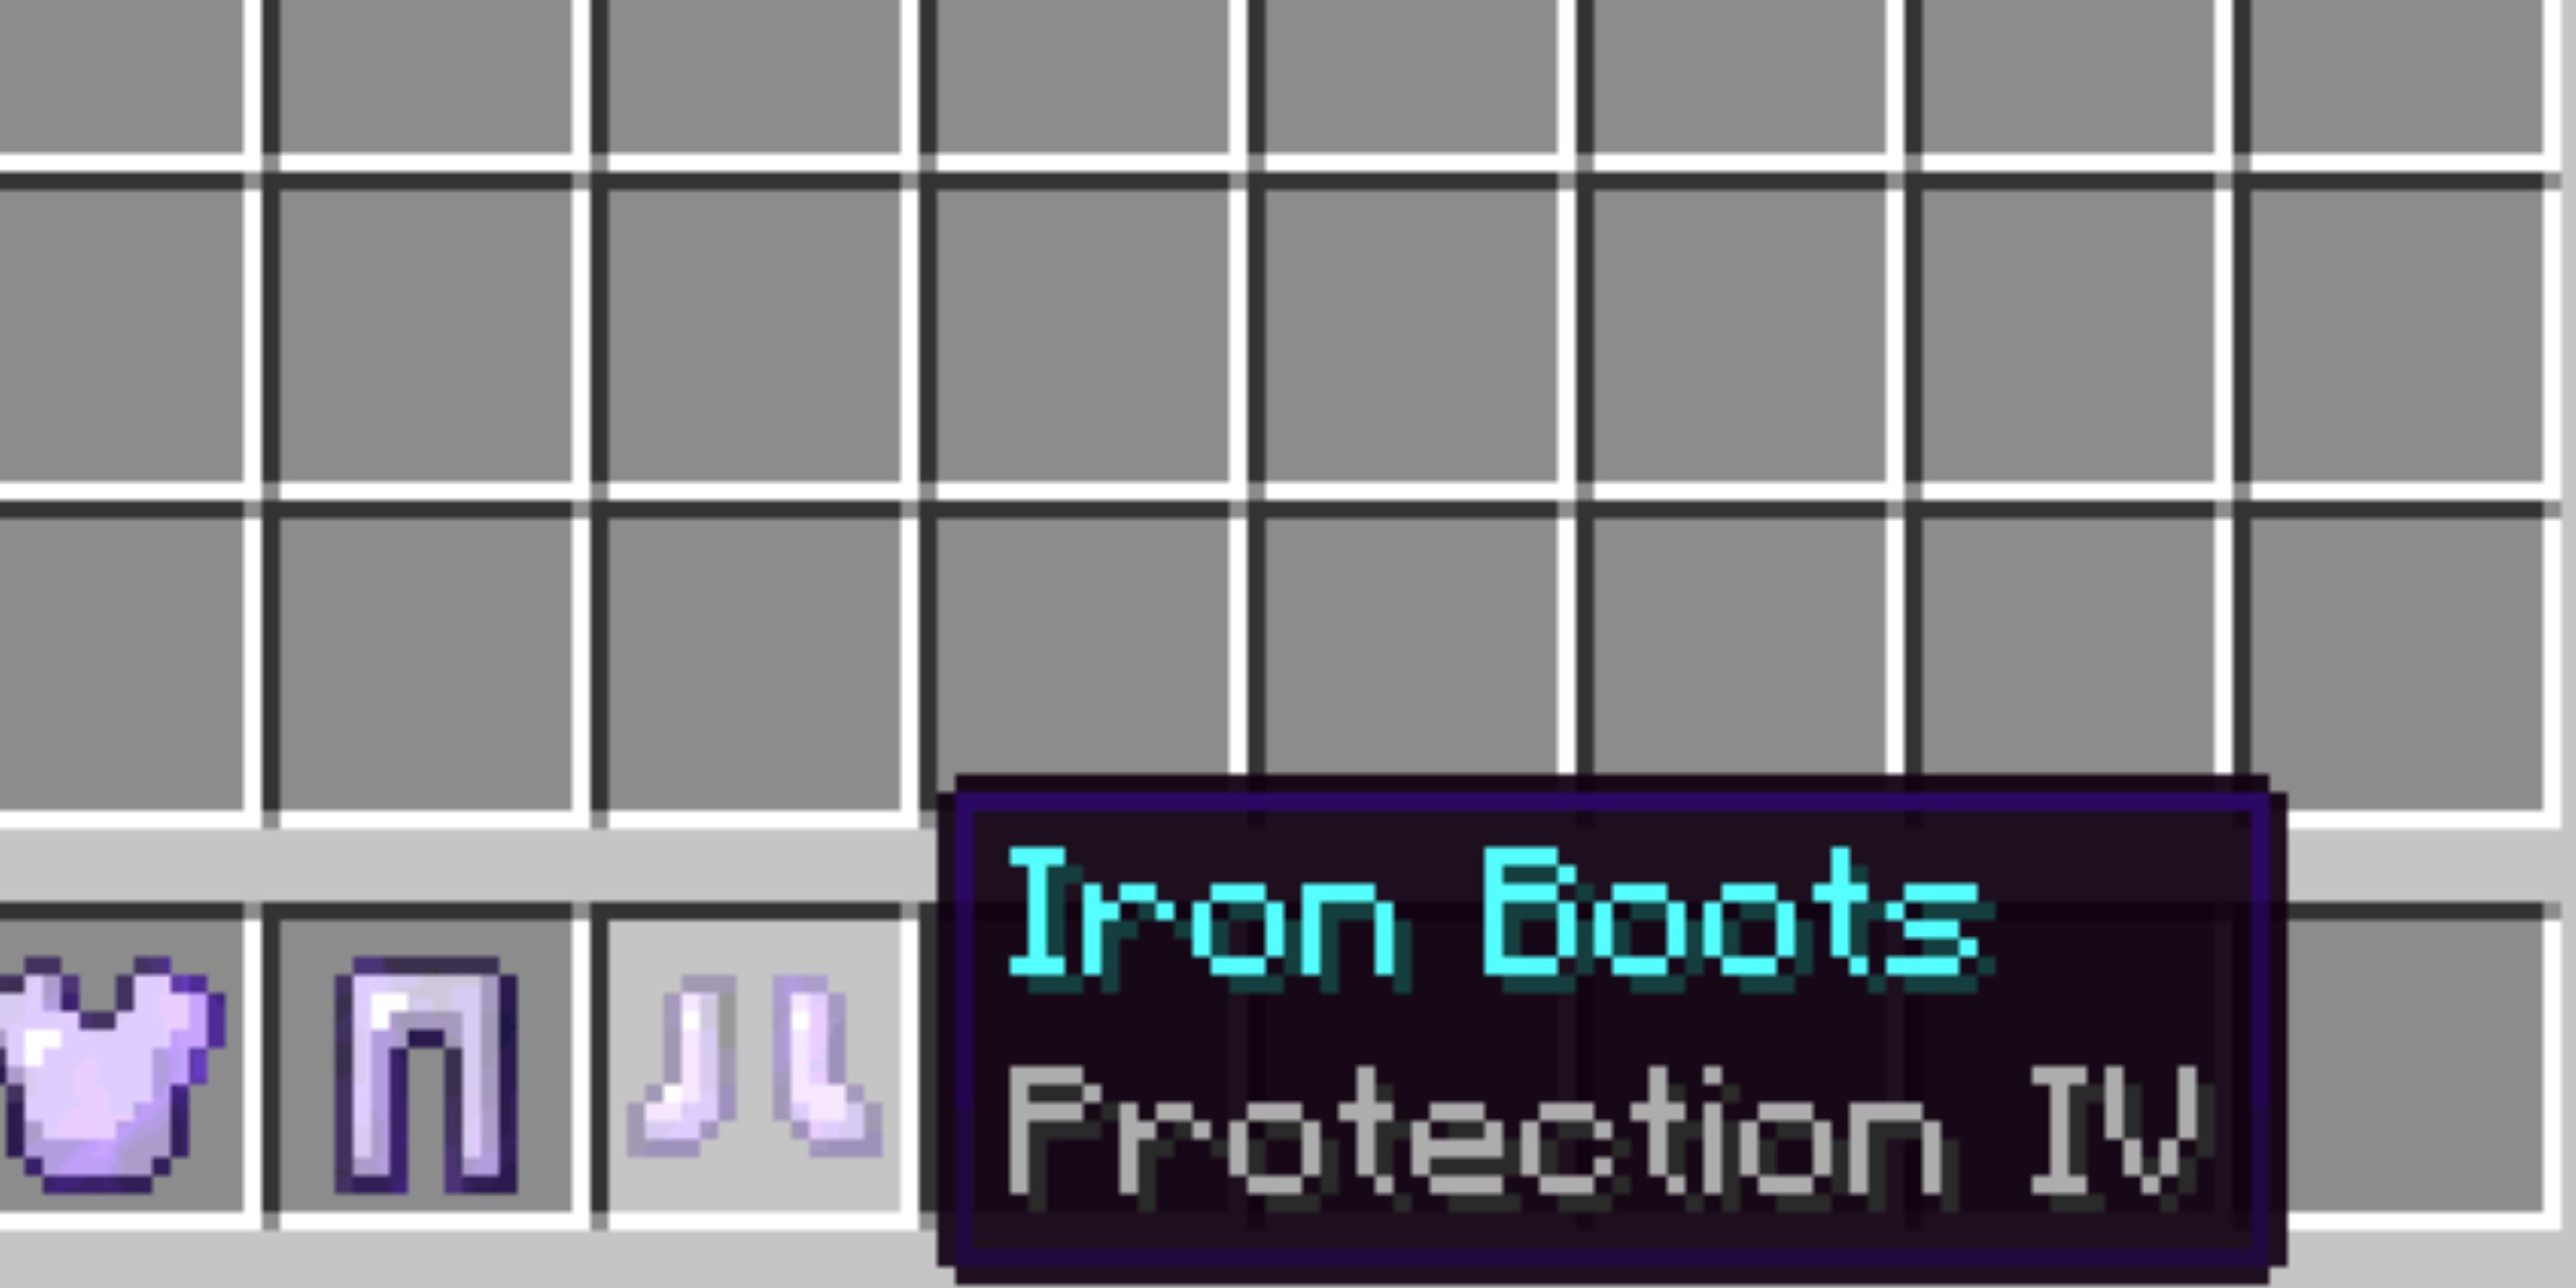 Protection 4 iron boots